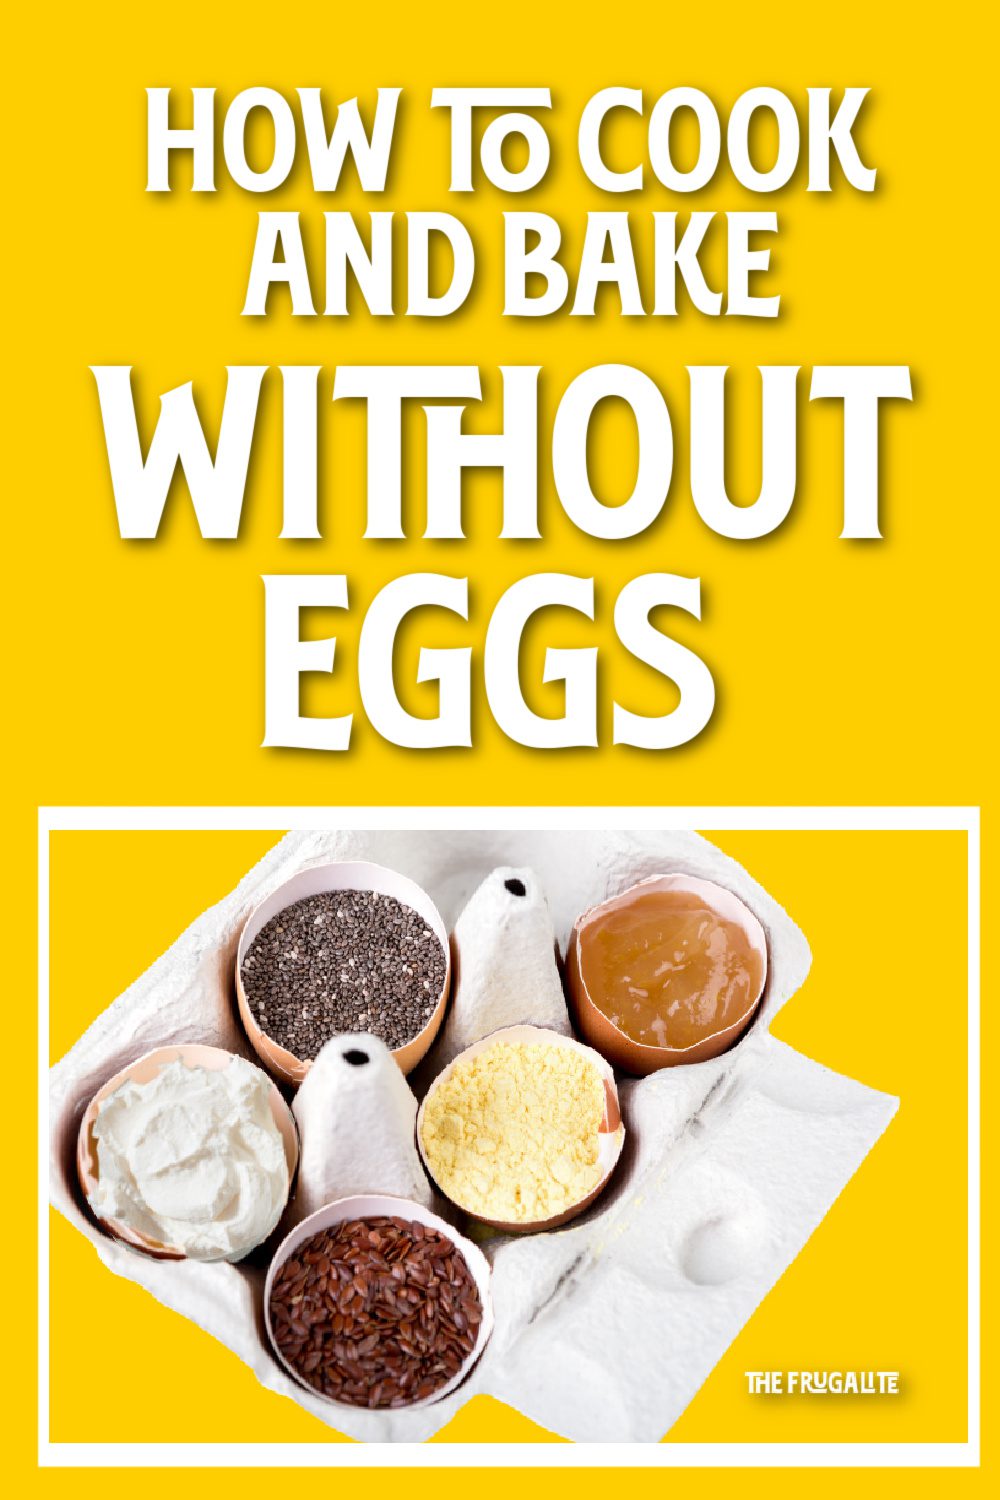 How to Cook and Bake Without Eggs